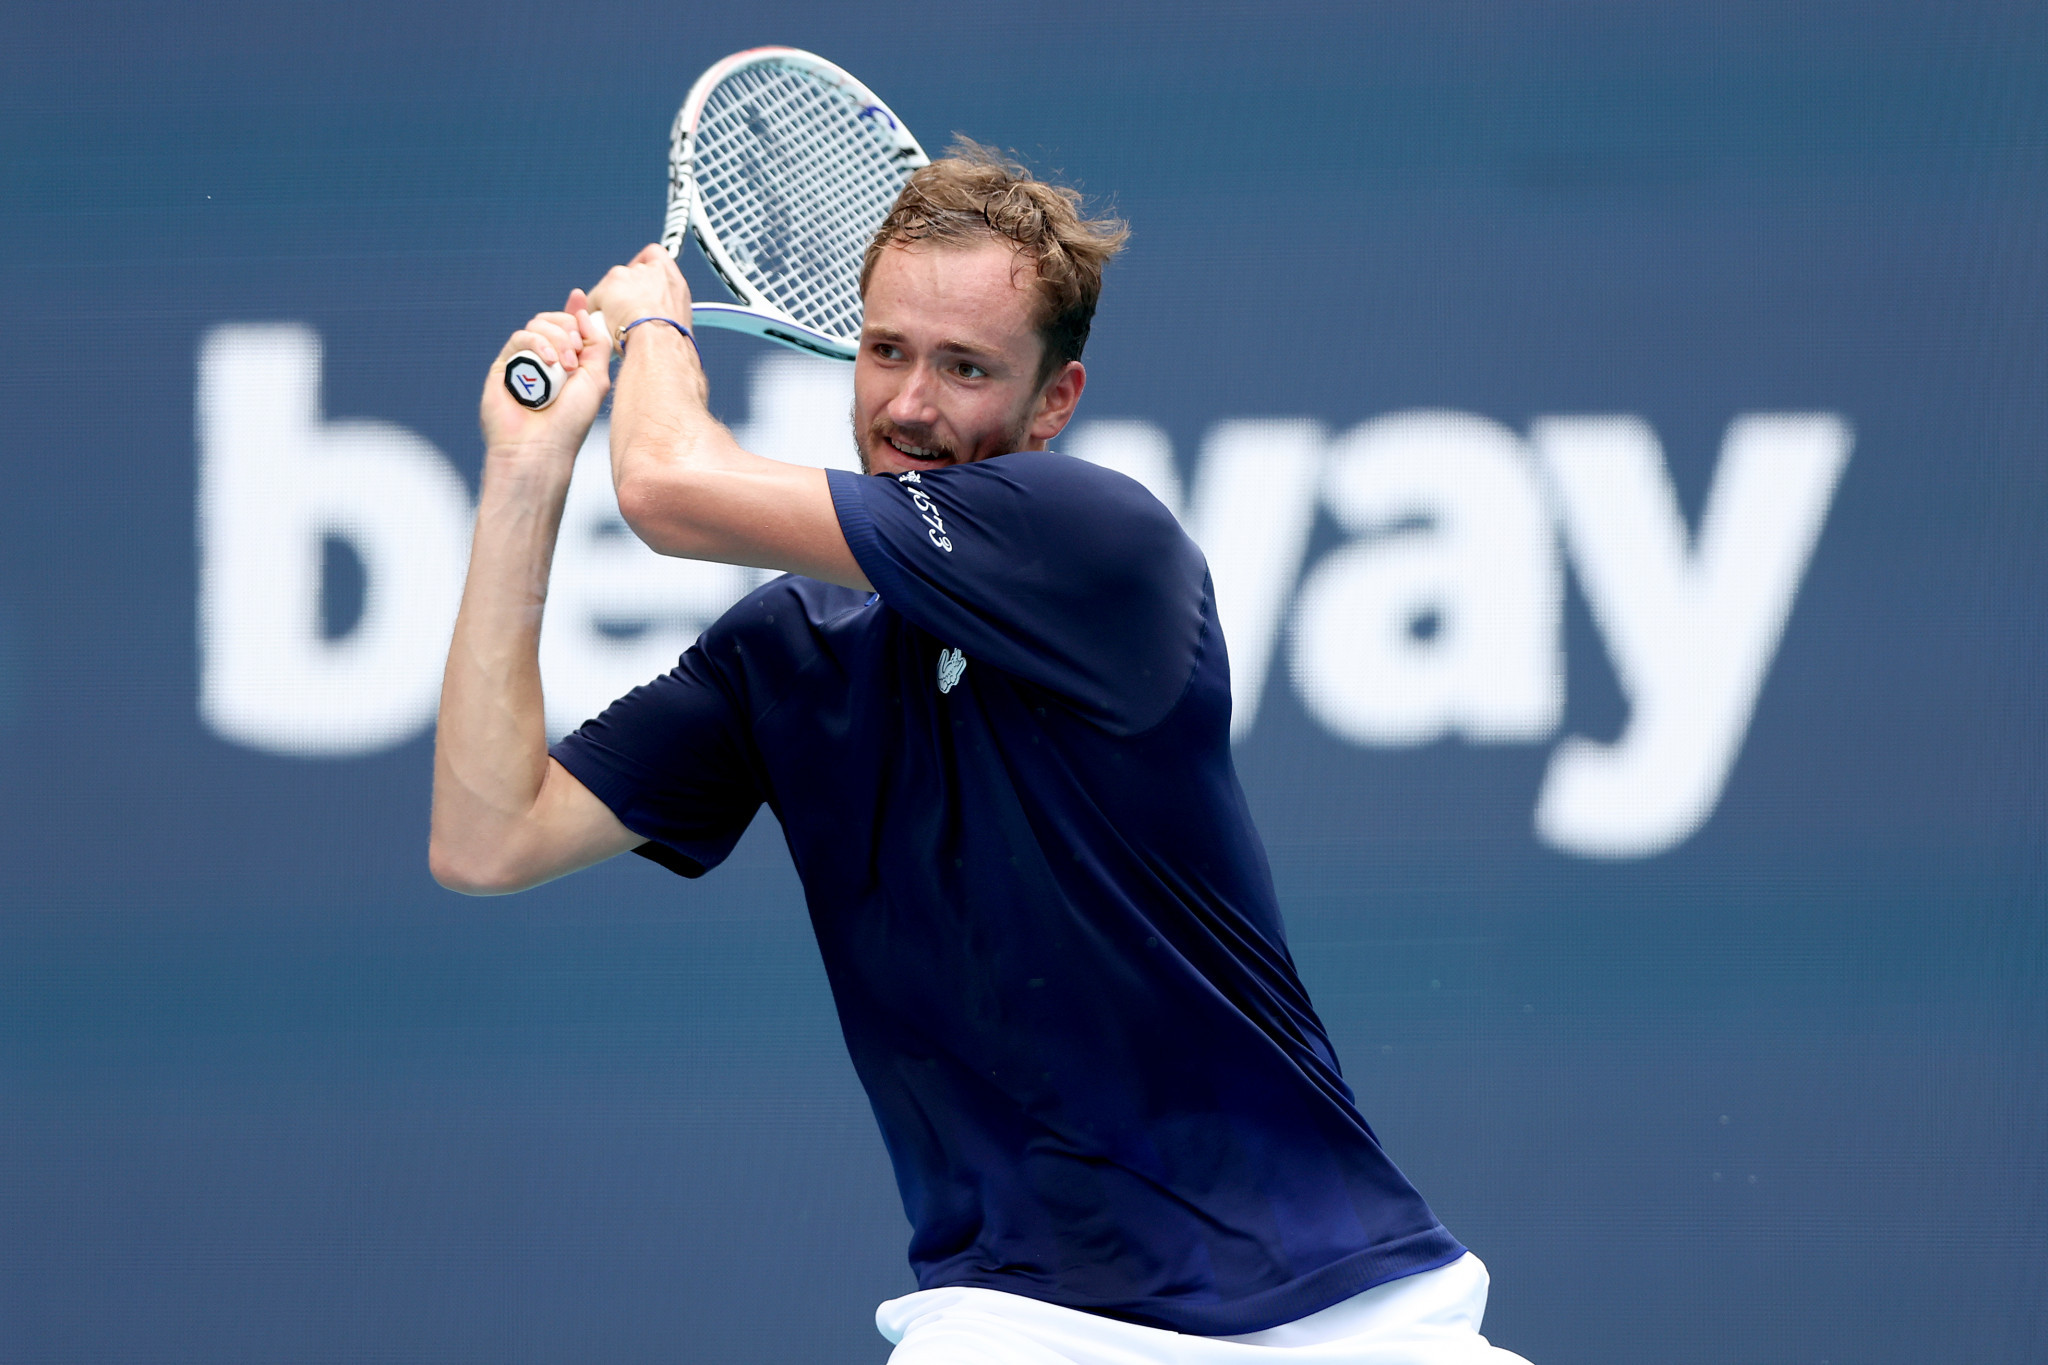 US Open champion Daniil Medvedev is among the highest profile names expected to be blocked from competing ©Getty Images